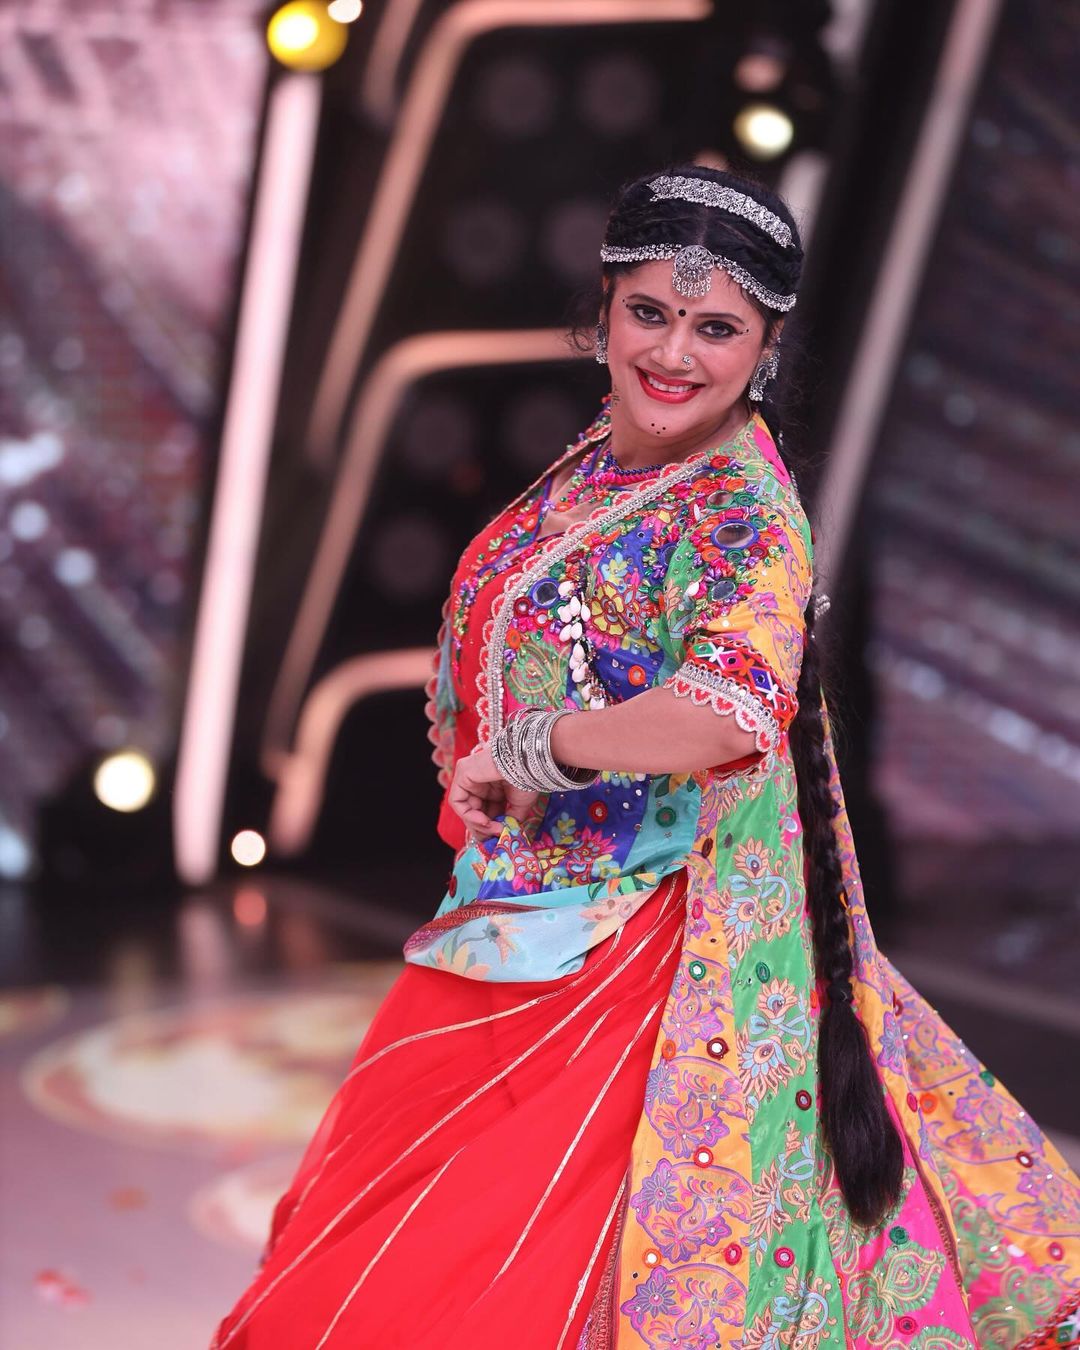 Jhalak Dikhhla Jaa 11: Actress Karuna Pandey Gets Evicted From The Show; Judge Farah Khan Praised And Expressed That She Will Be Missed